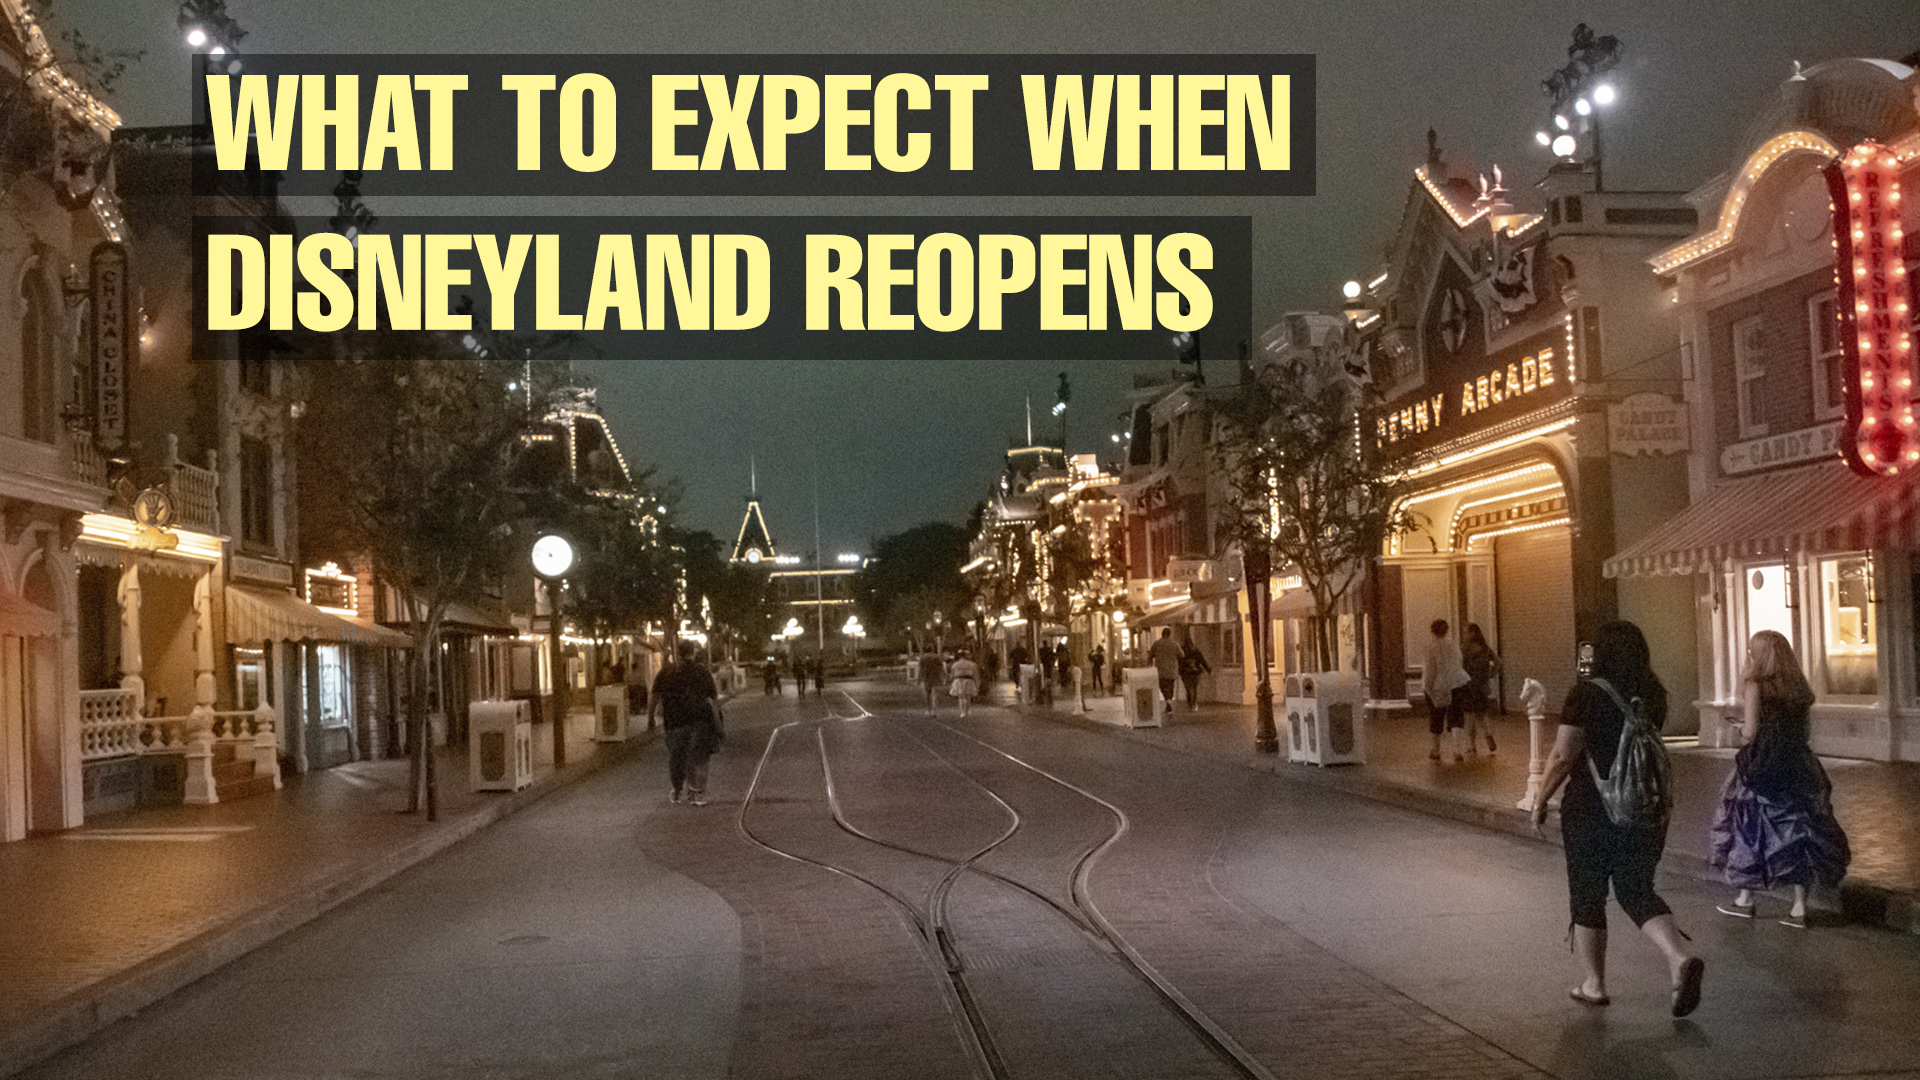 What to Expect for Disneyland Reopening and Reservation System From a Walt Disney World Experience